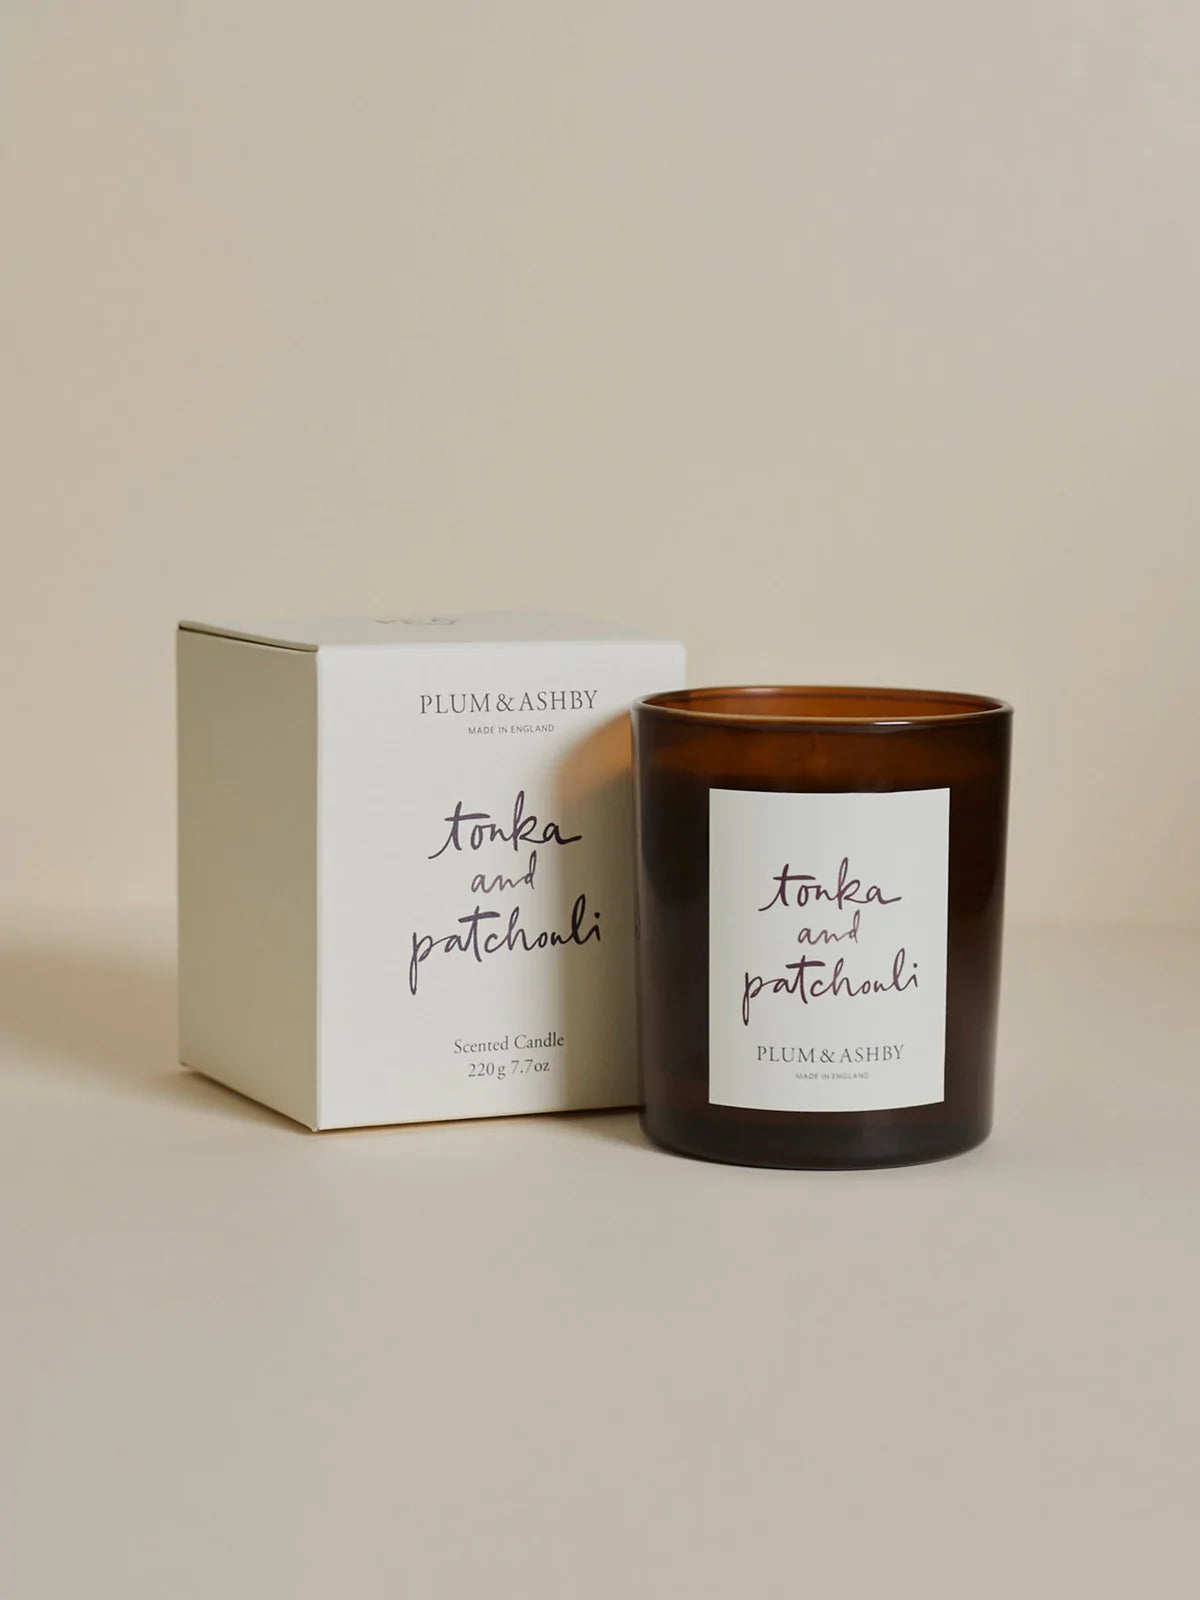 Plum & Ashby Candle : Tonka and Patchouli